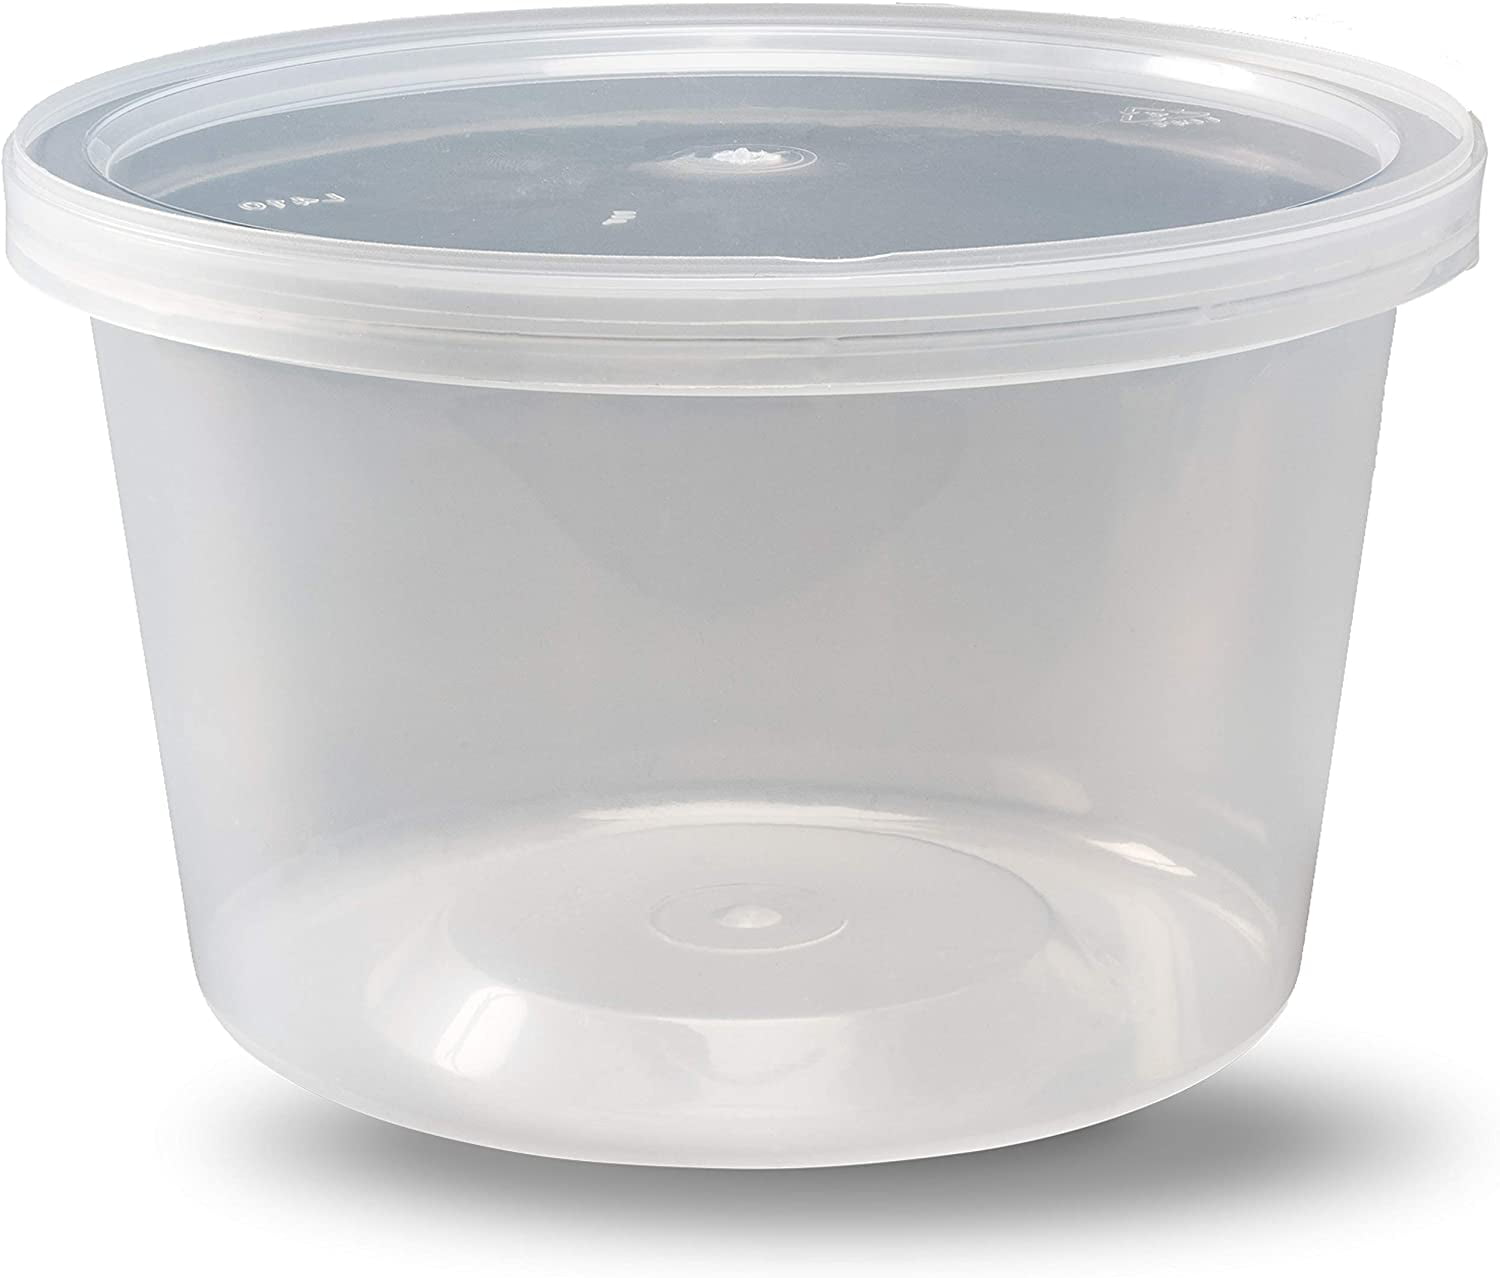 New Plastic Clear Deli Containers set cup with Airtight Lids Leakproof storage 